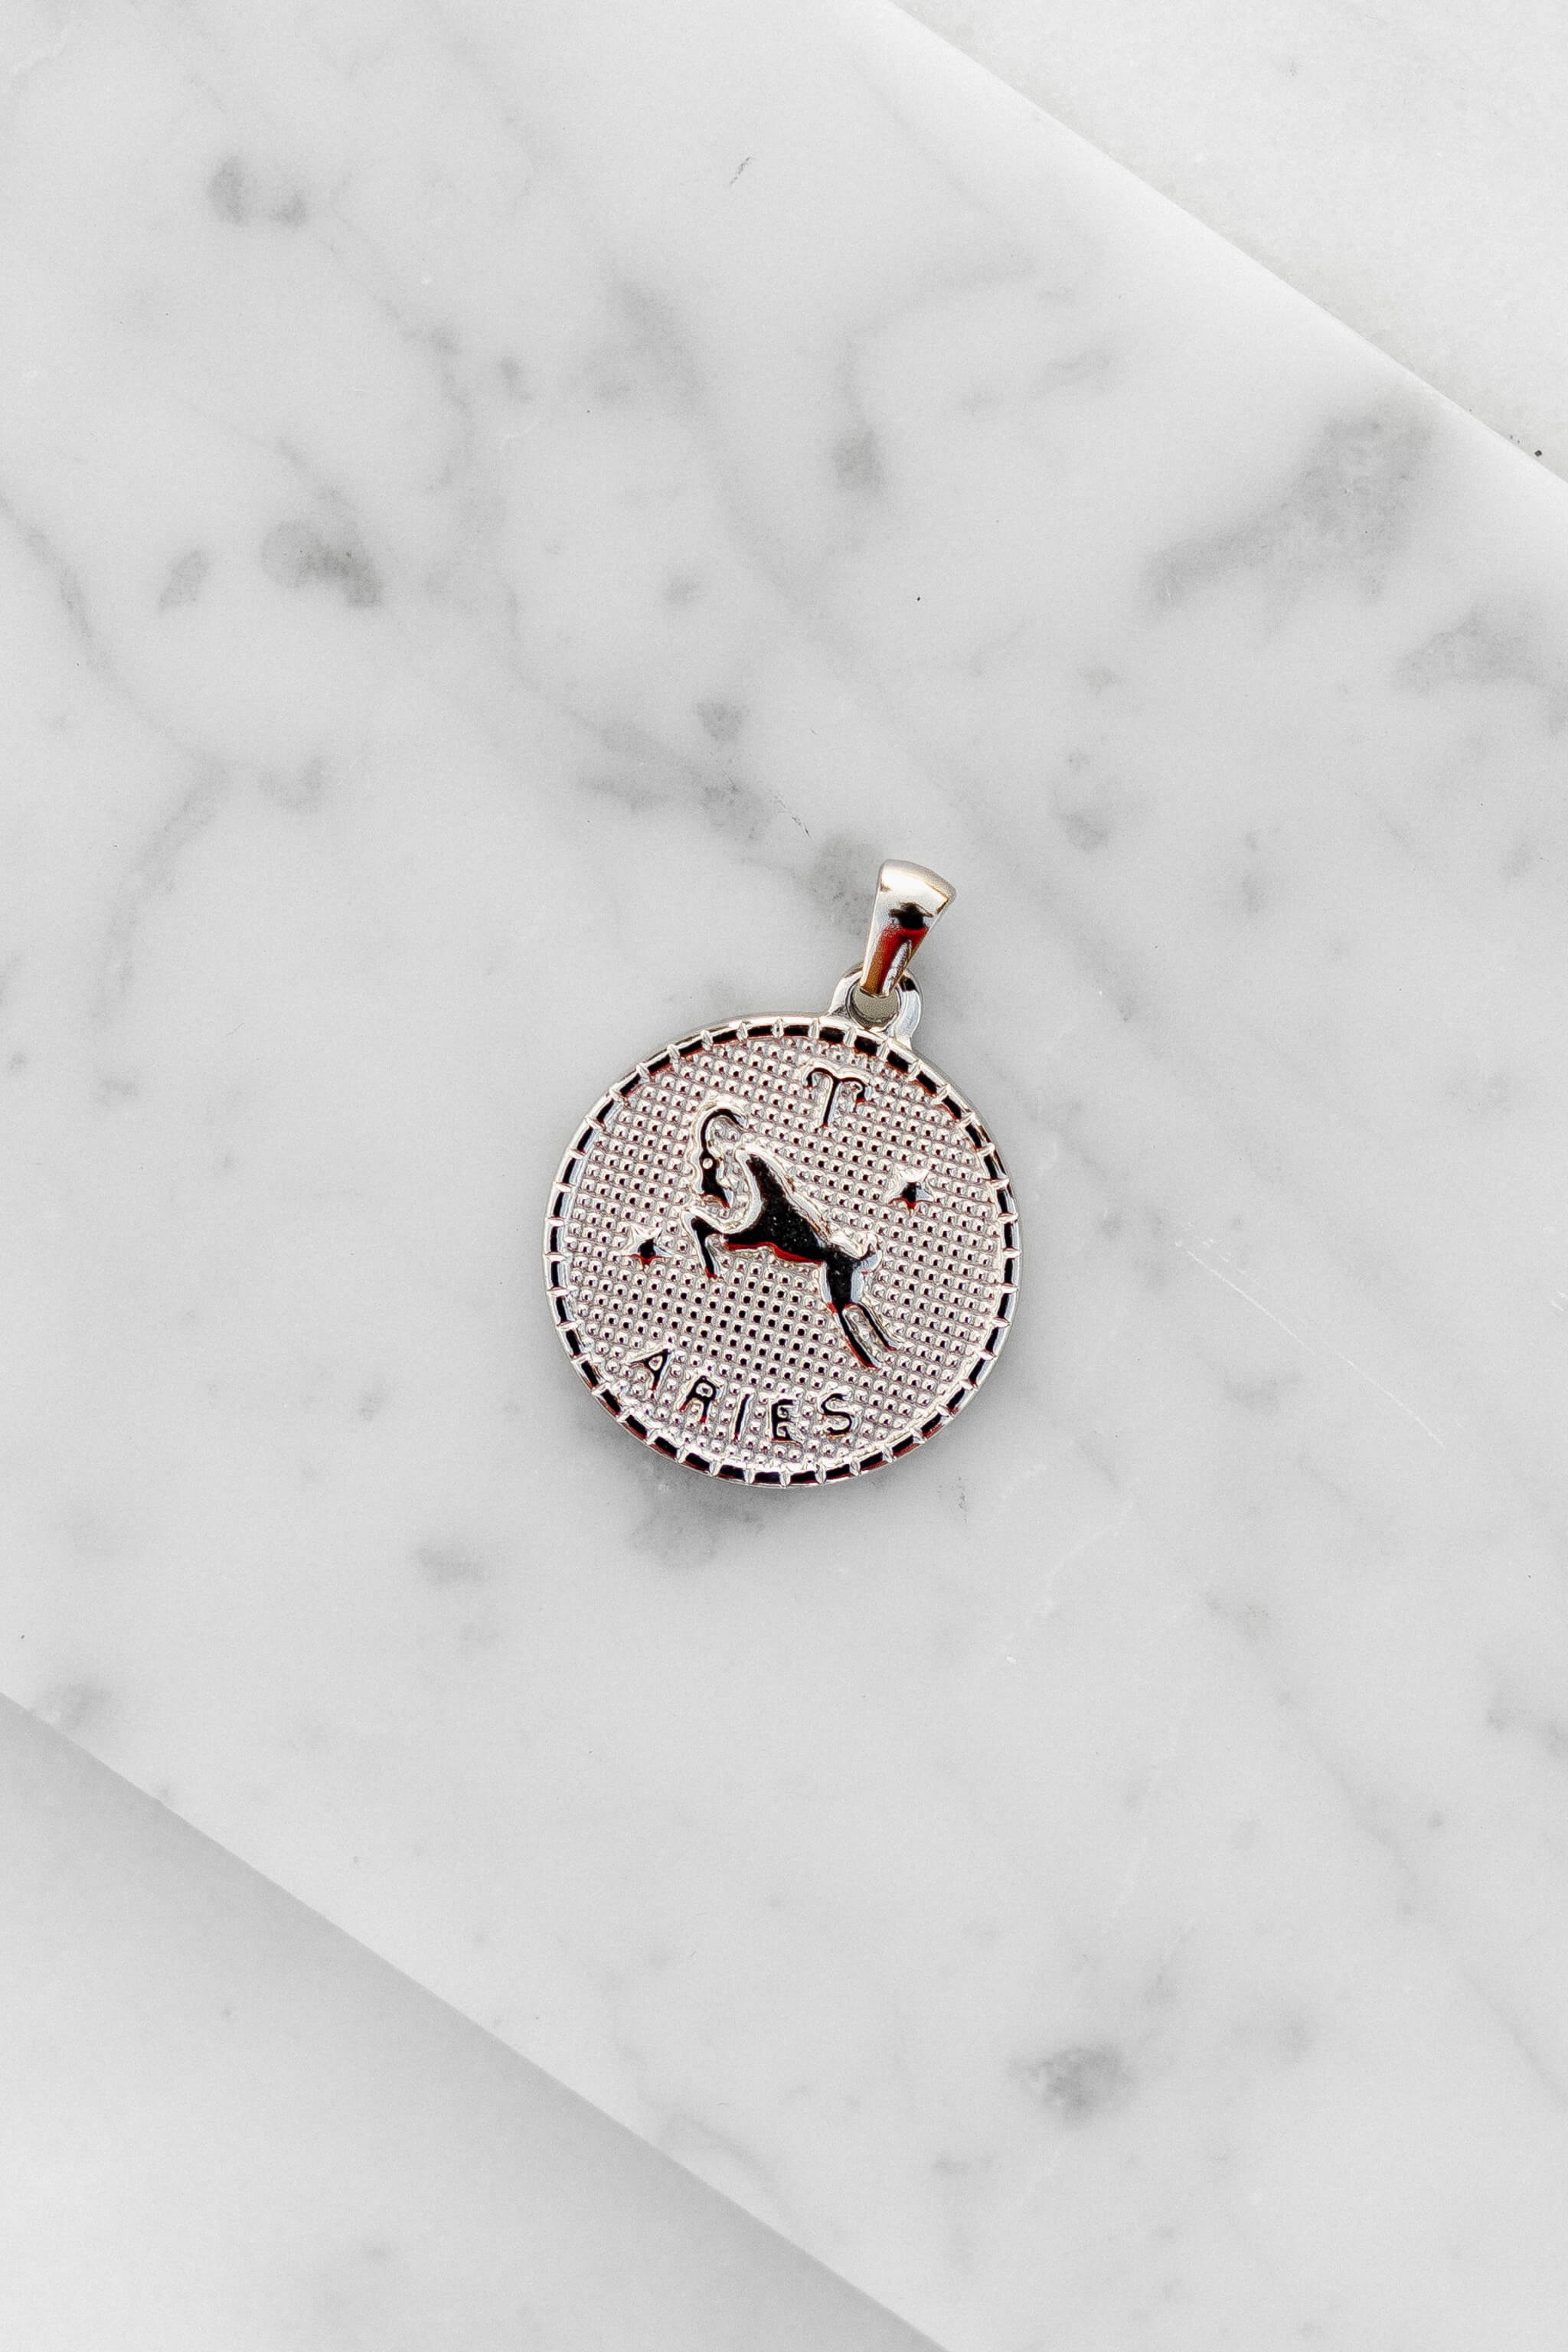 Aries zodiac sign silver coin charm laying on a white marble